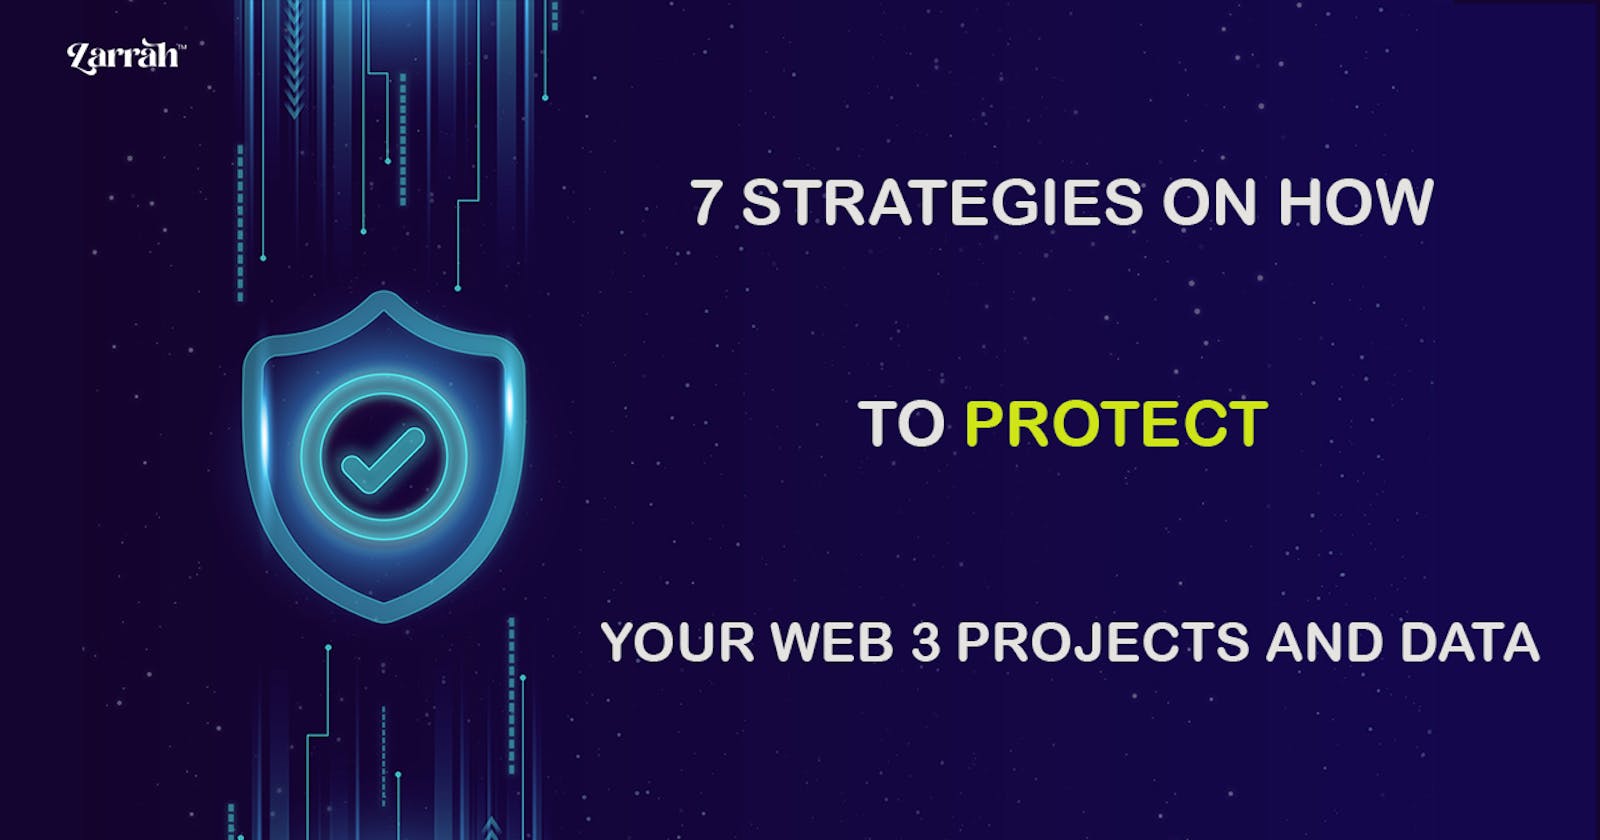 WEB3 SECURITY: 7 Strategies On How To Protect Your Web3 Projects and Data.